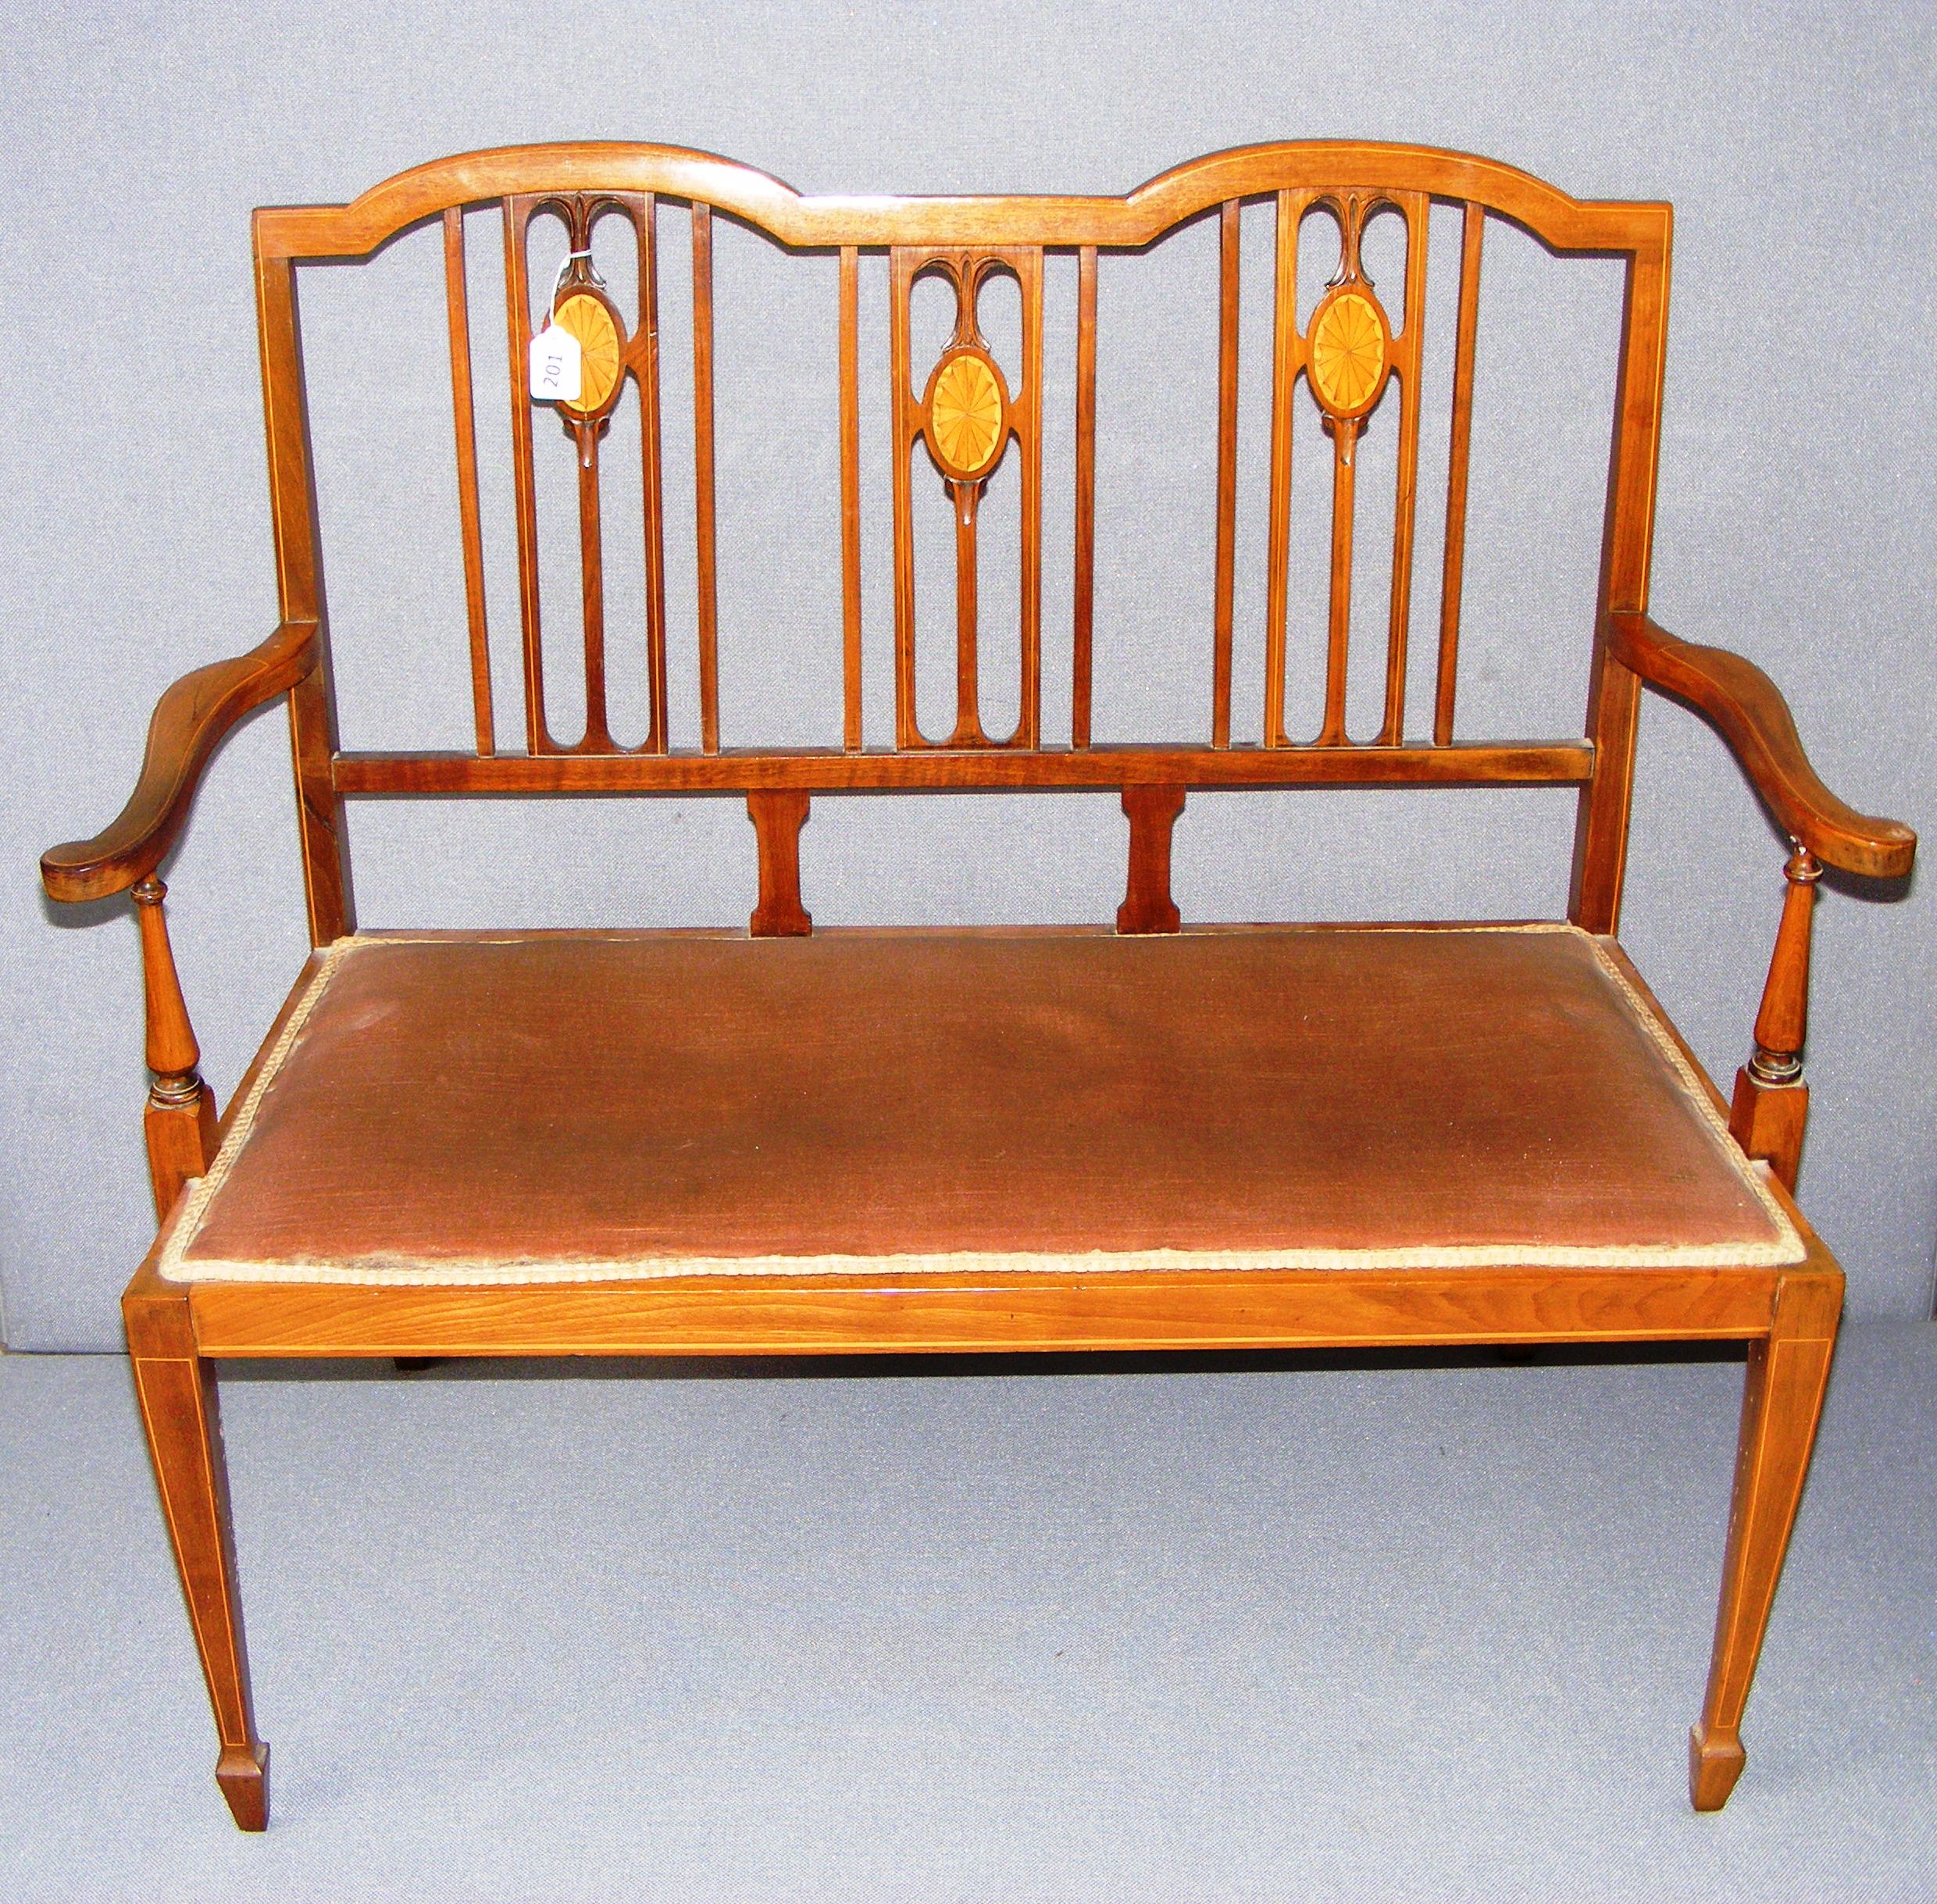 An Edwardian inlaid mahogany bench in good condition.